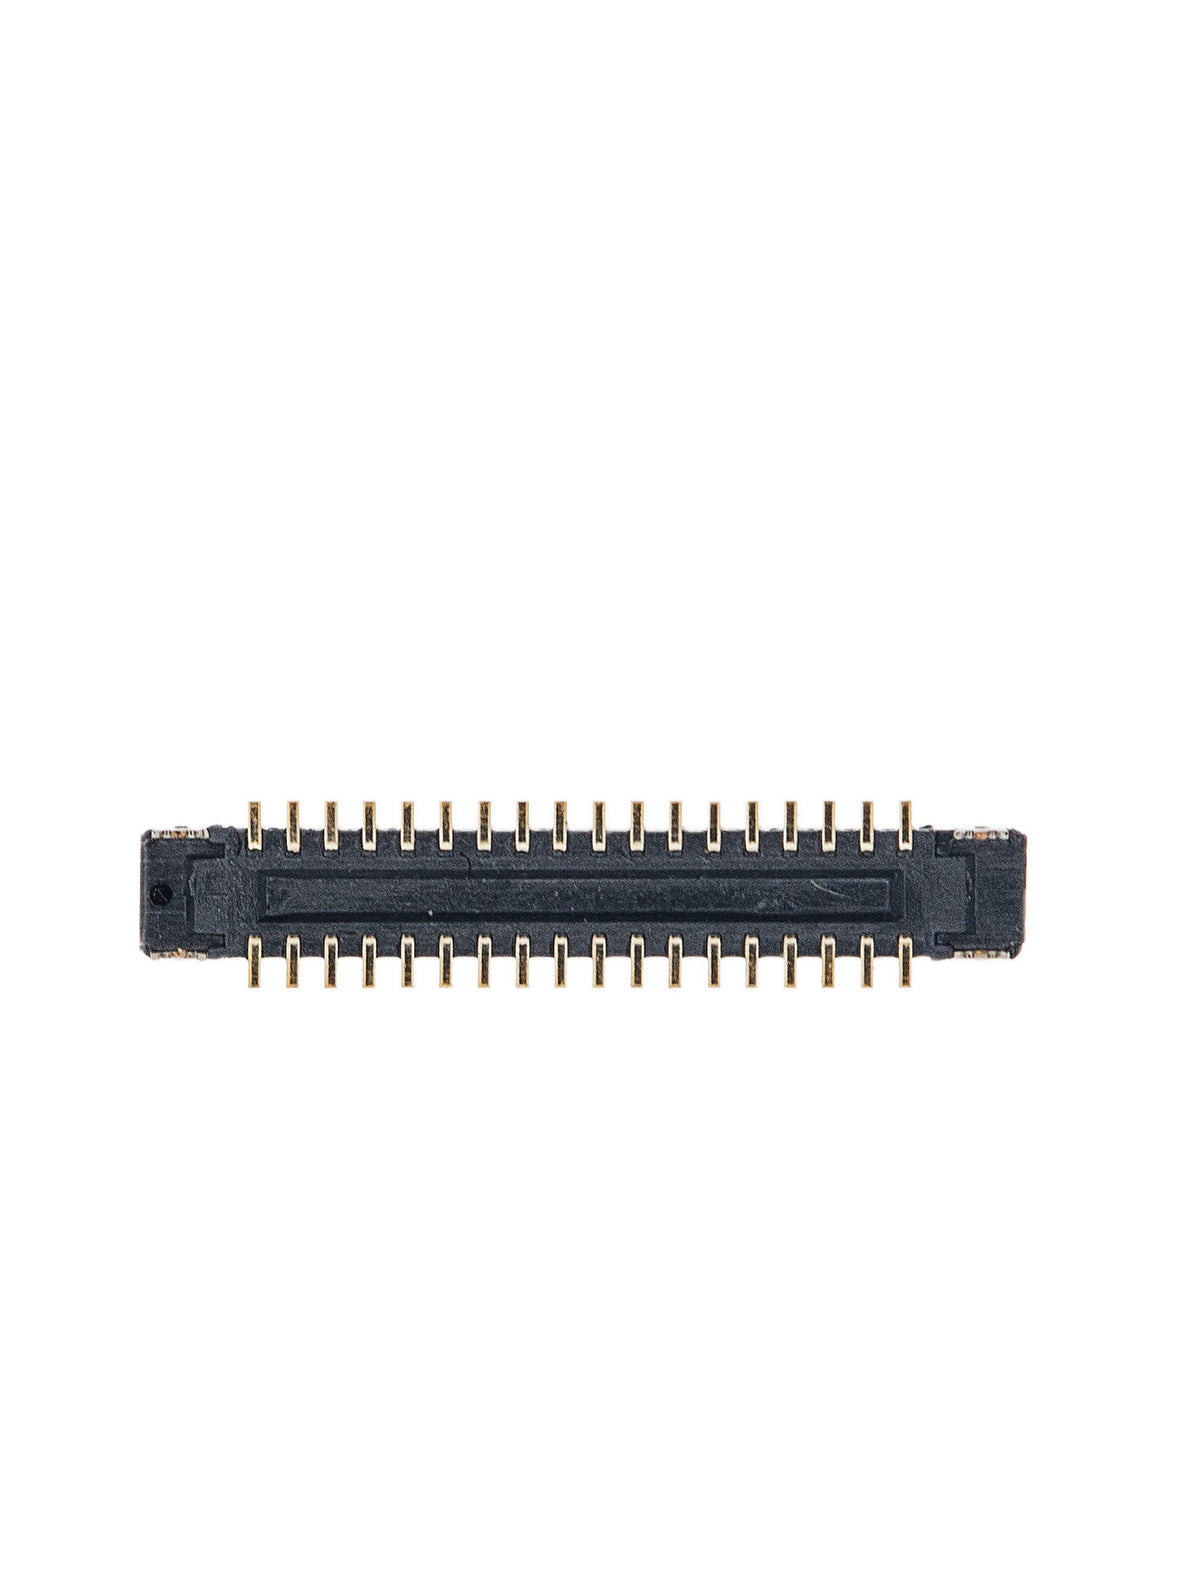 LCD (ON THE LCD FLEX NOT THE MOTHERBOARD) FPC CONNECTOR (36 PIN) FOR IPAD PRO 10.5